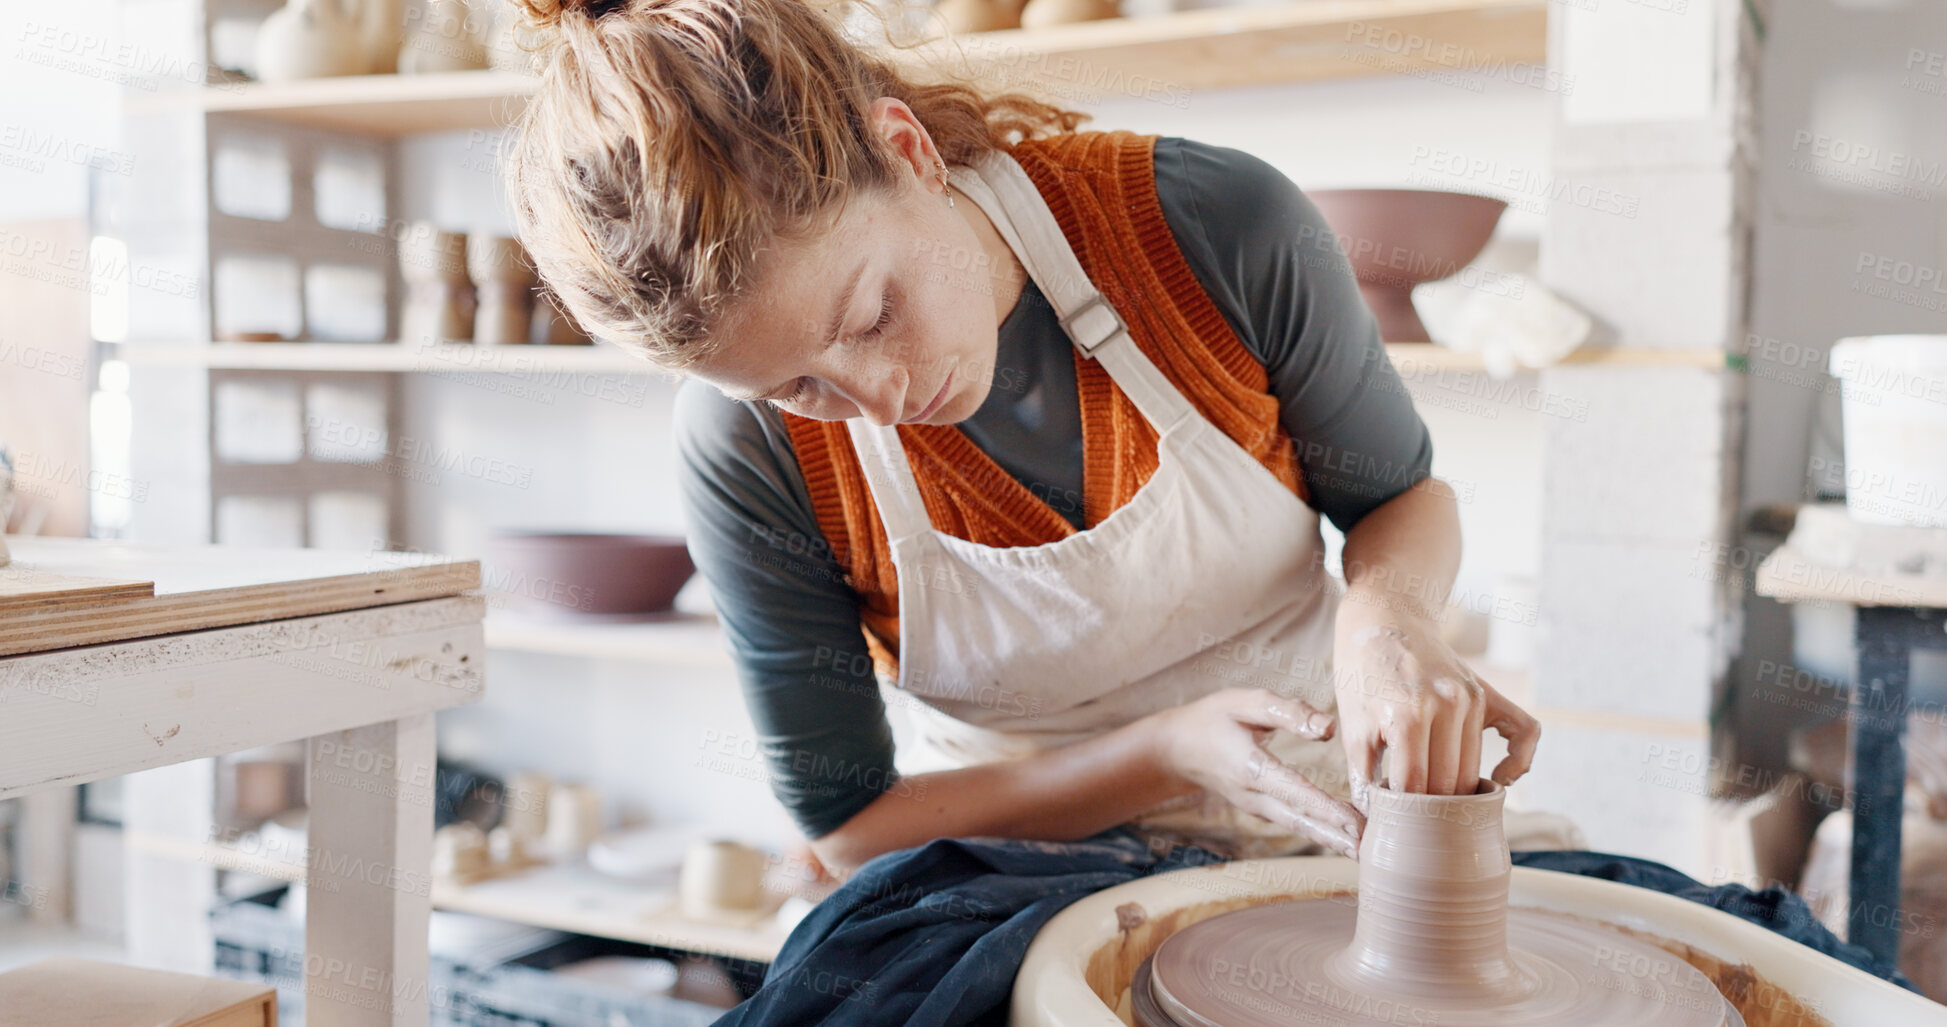 Buy stock photo Pottery, creative and woman artist by wheel for manufacturing clay products for small business. Art, mud design and young female sculptor working on ceramic handicraft goods fir production in studio.